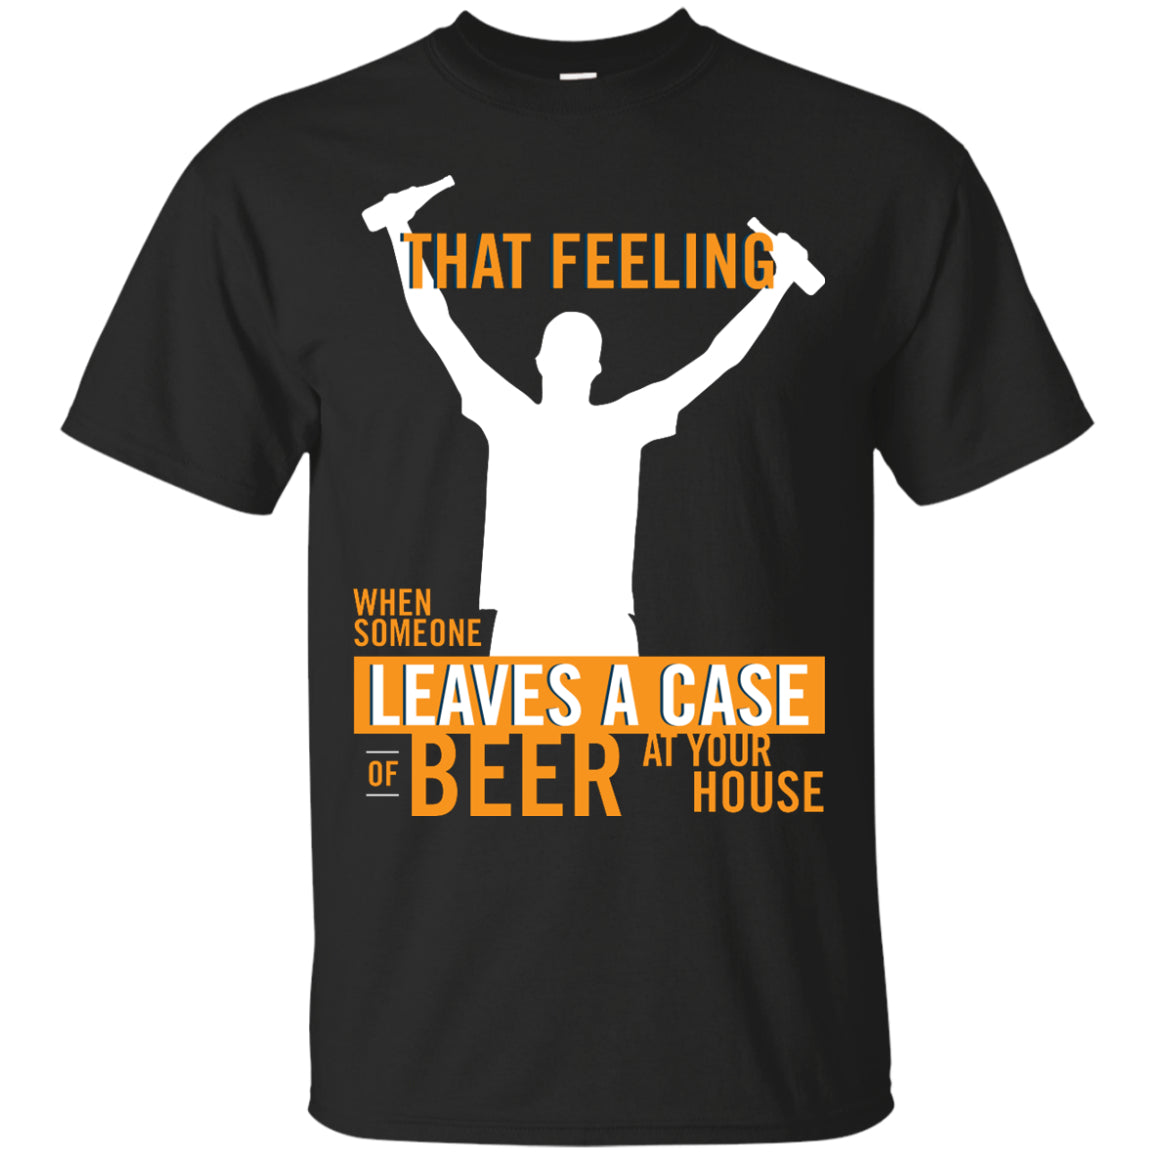 That Feeling When Someone Leaves A Case Of Beer At Your House T-Shirt Apparel - The Beer Lodge